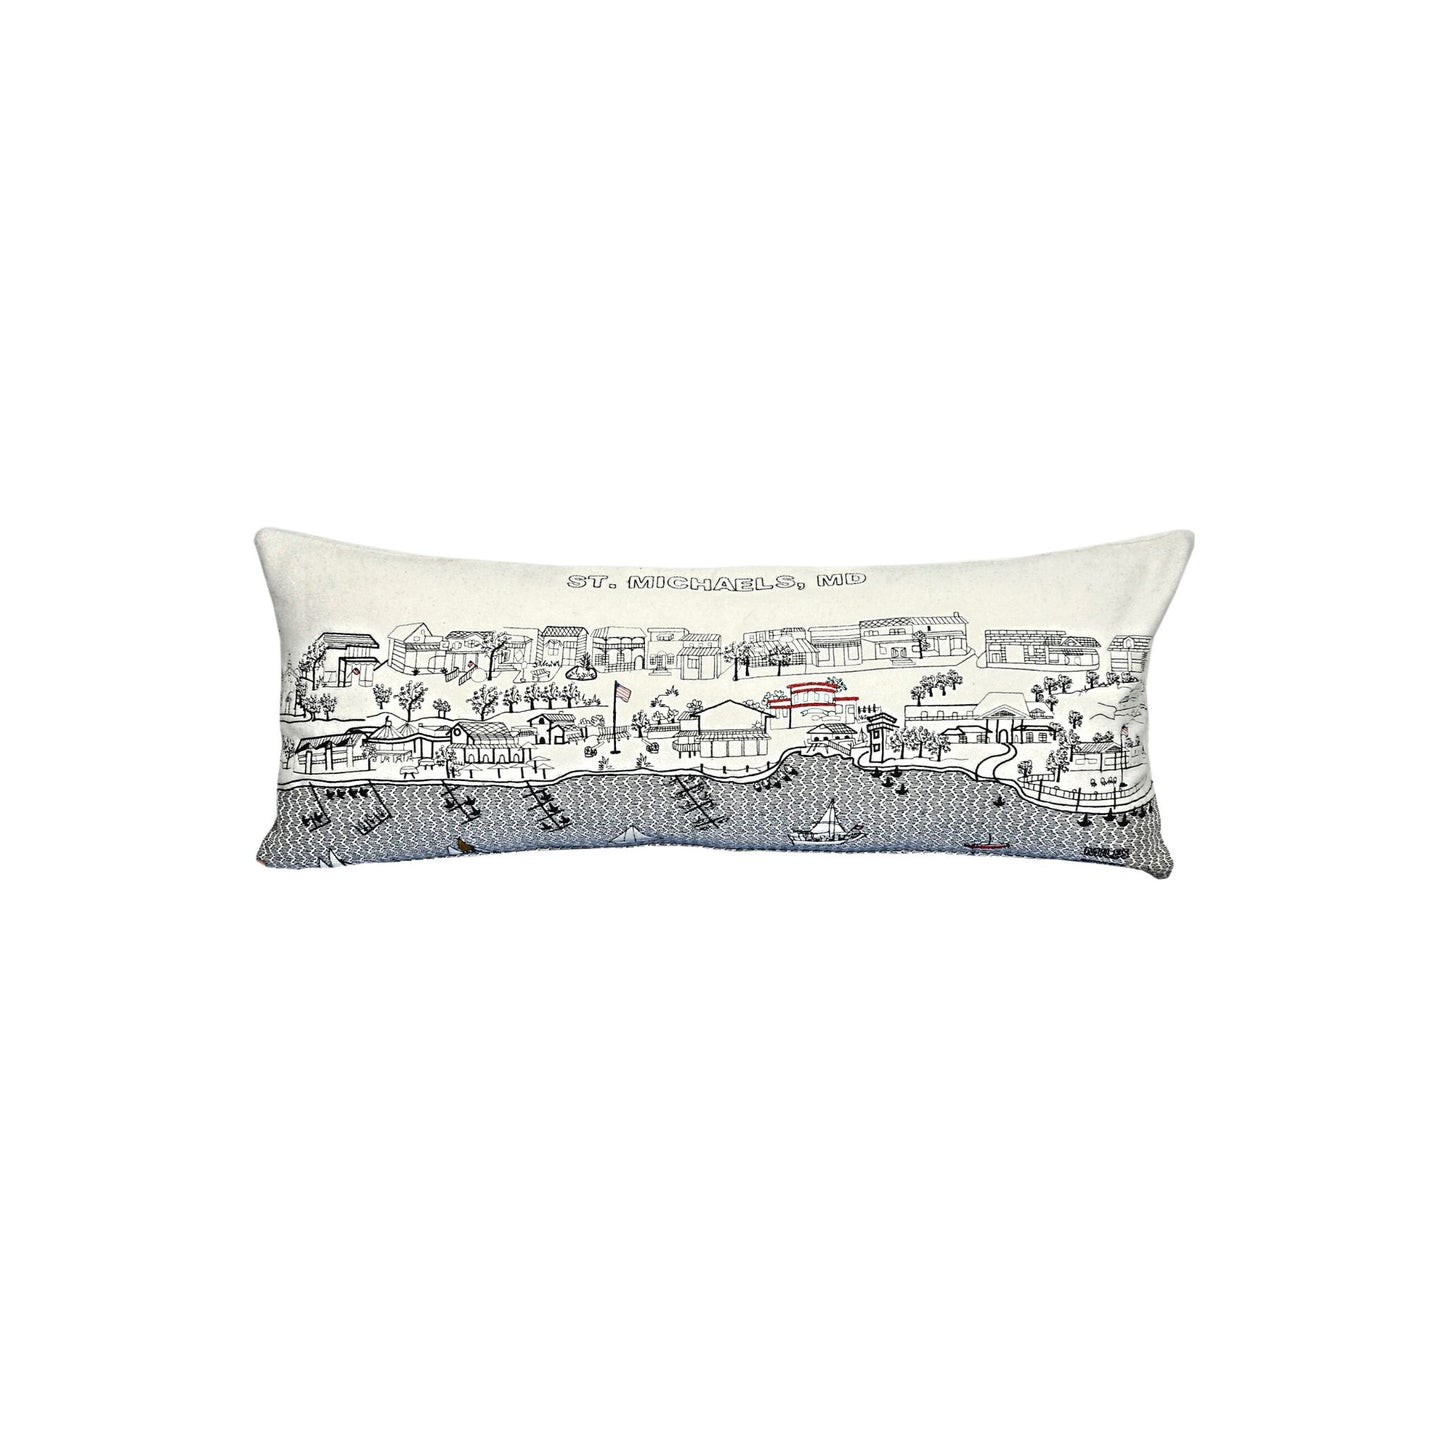 St. Michaels, Maryland Queen Day Pillow